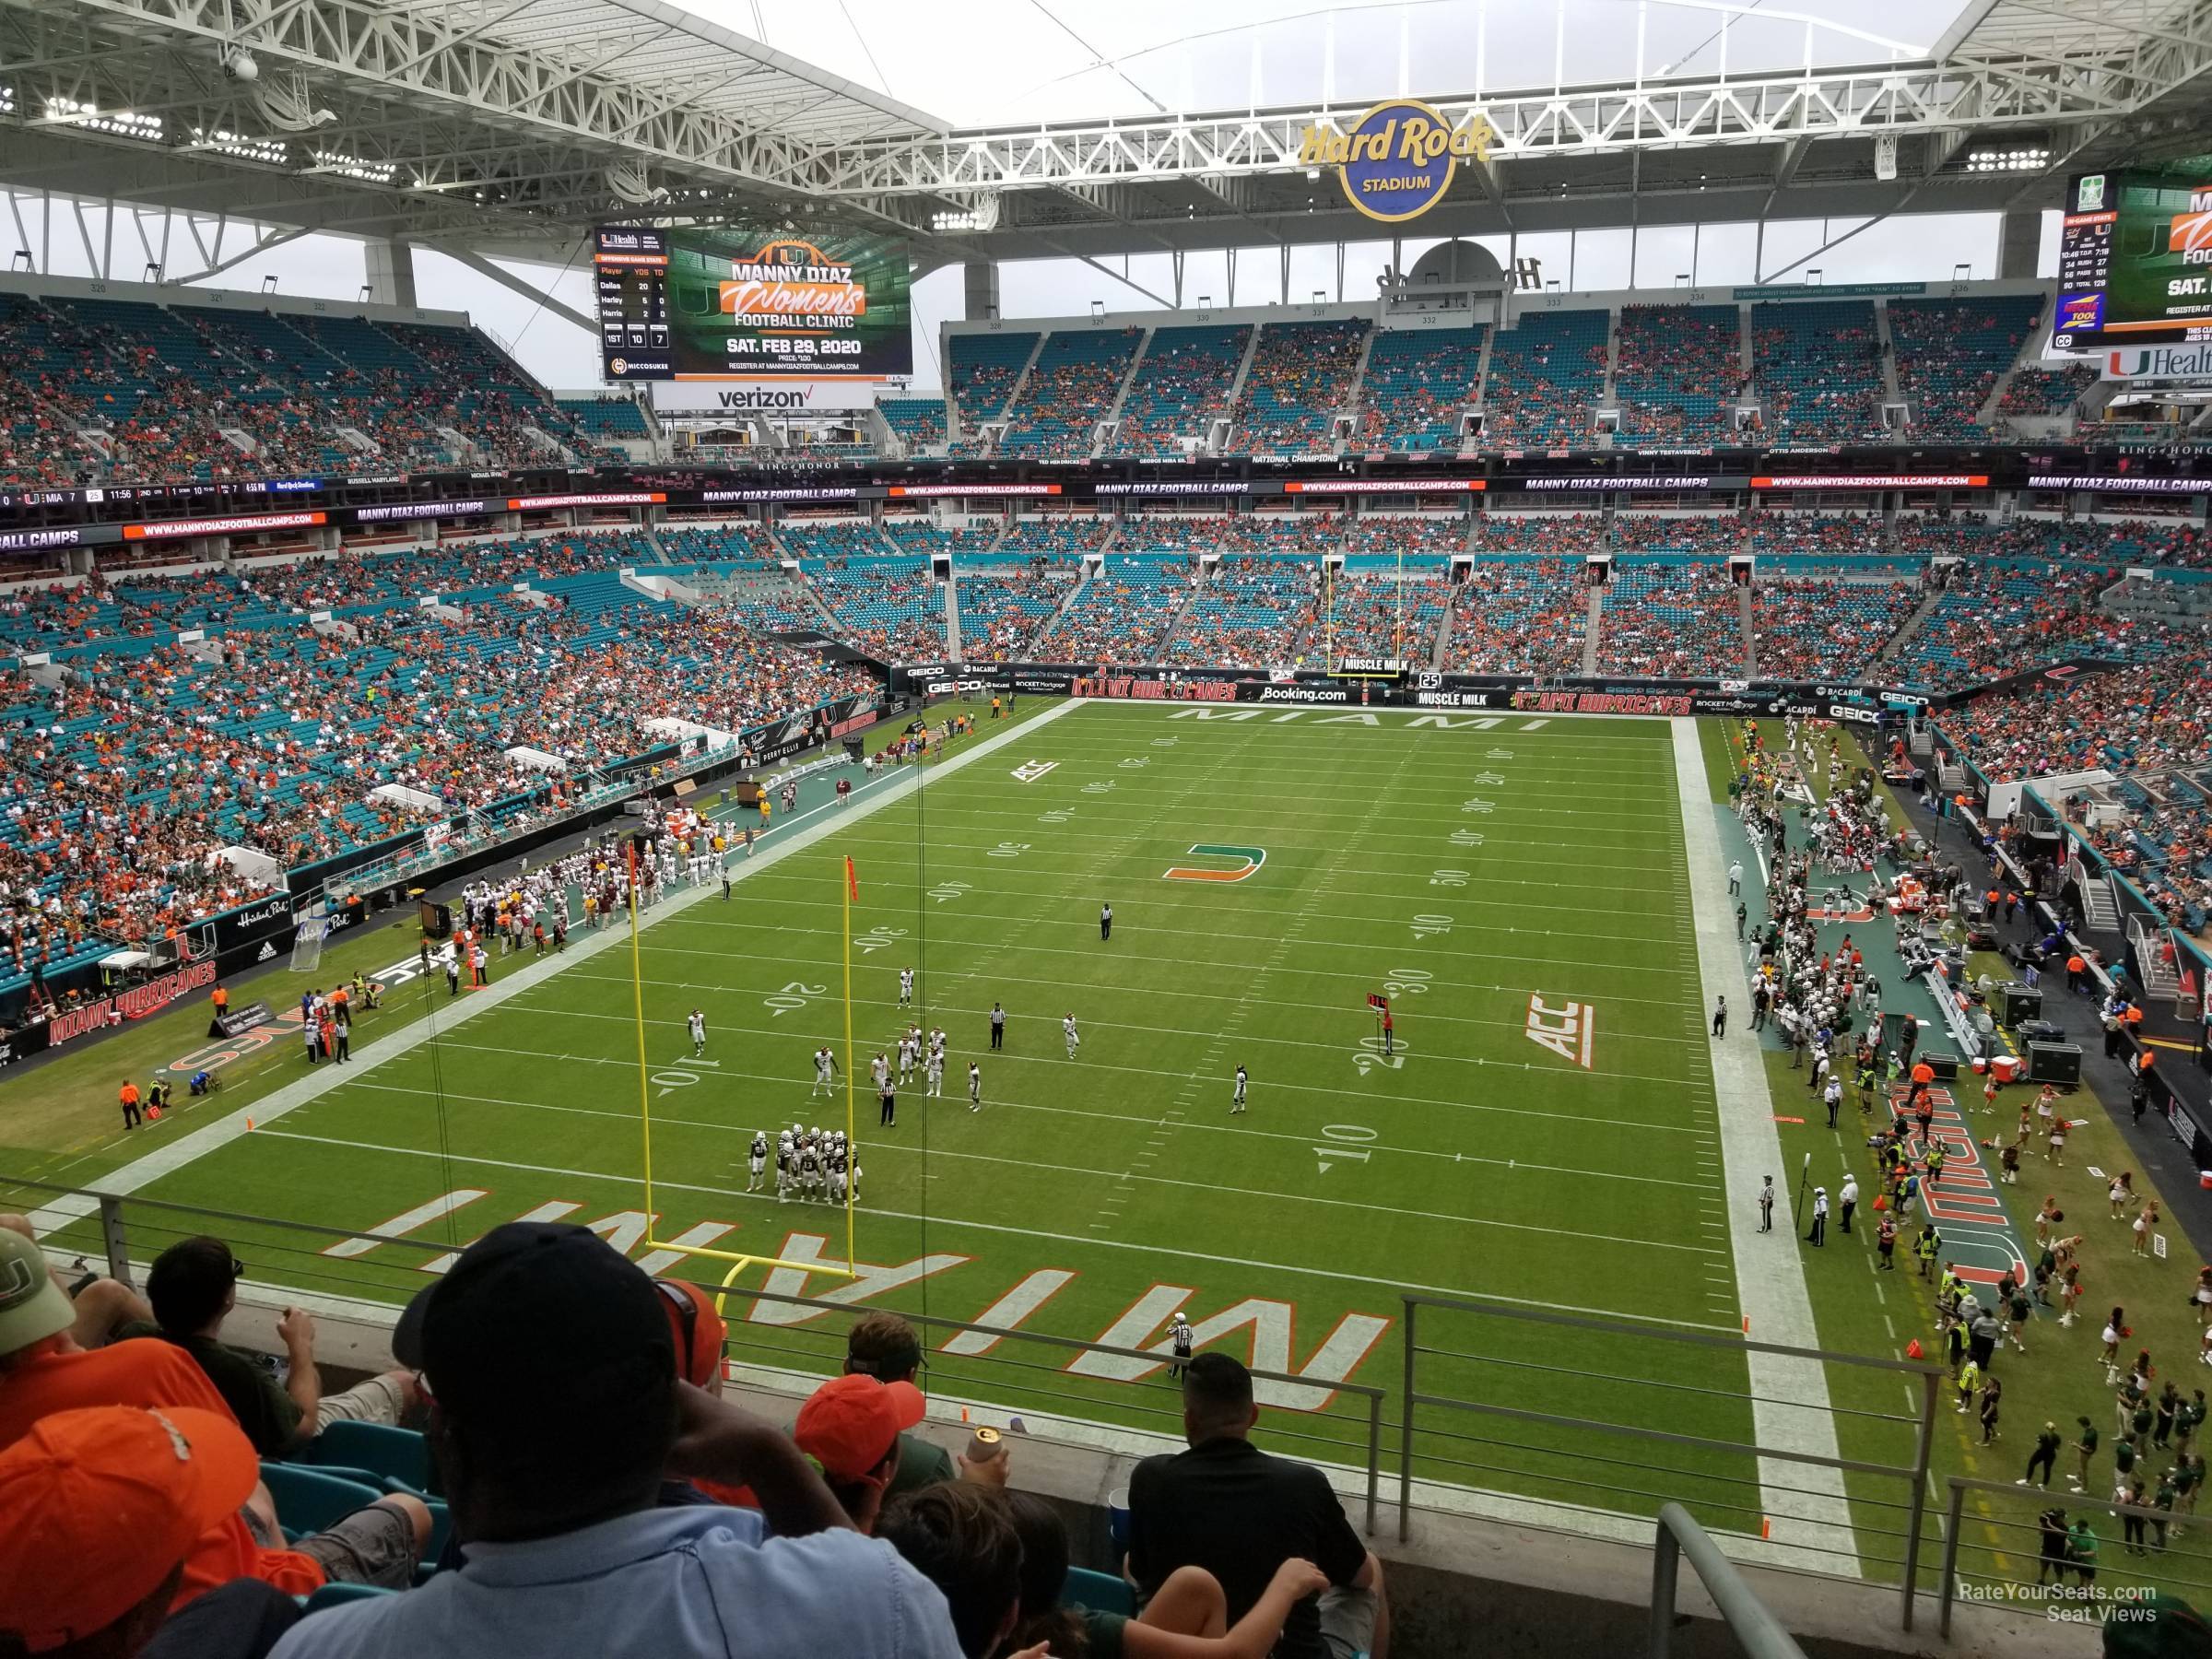 section 303, row 5 seat view  for football - hard rock stadium